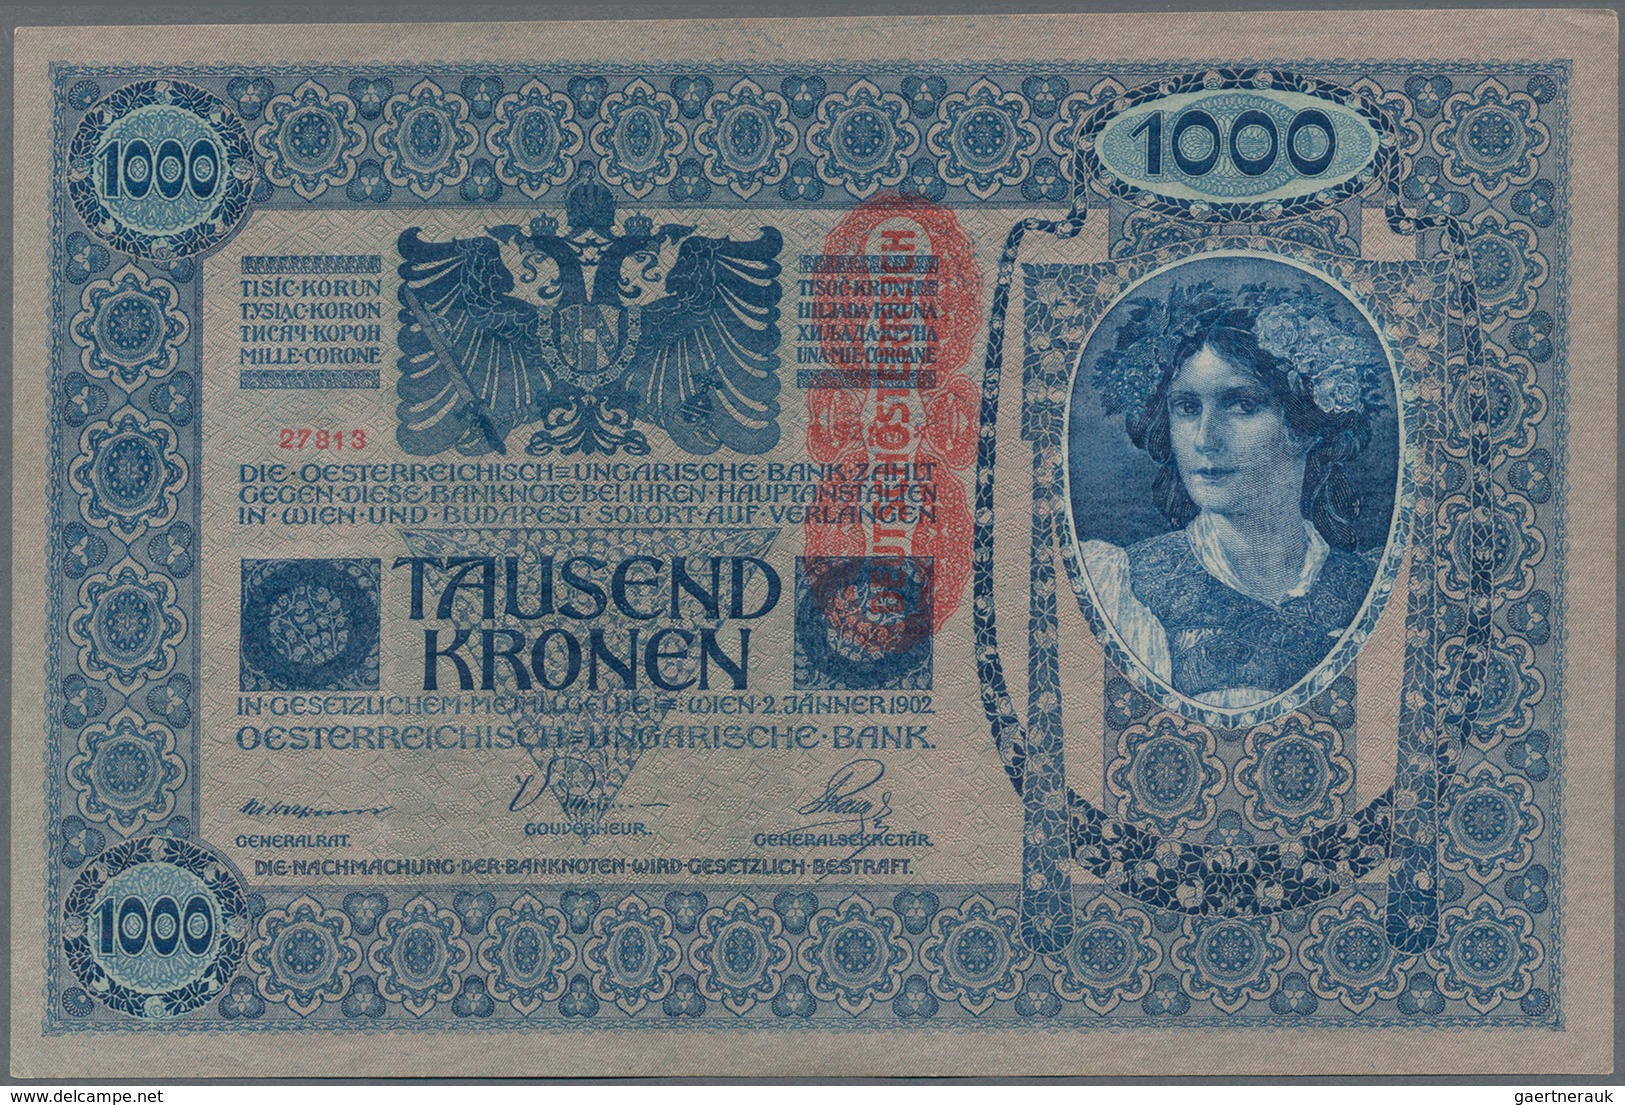 Alle Welt: Very nice lot with 24 banknotes containing Great Britain 2 x 1 Pound ND(1940-48) in VF, F